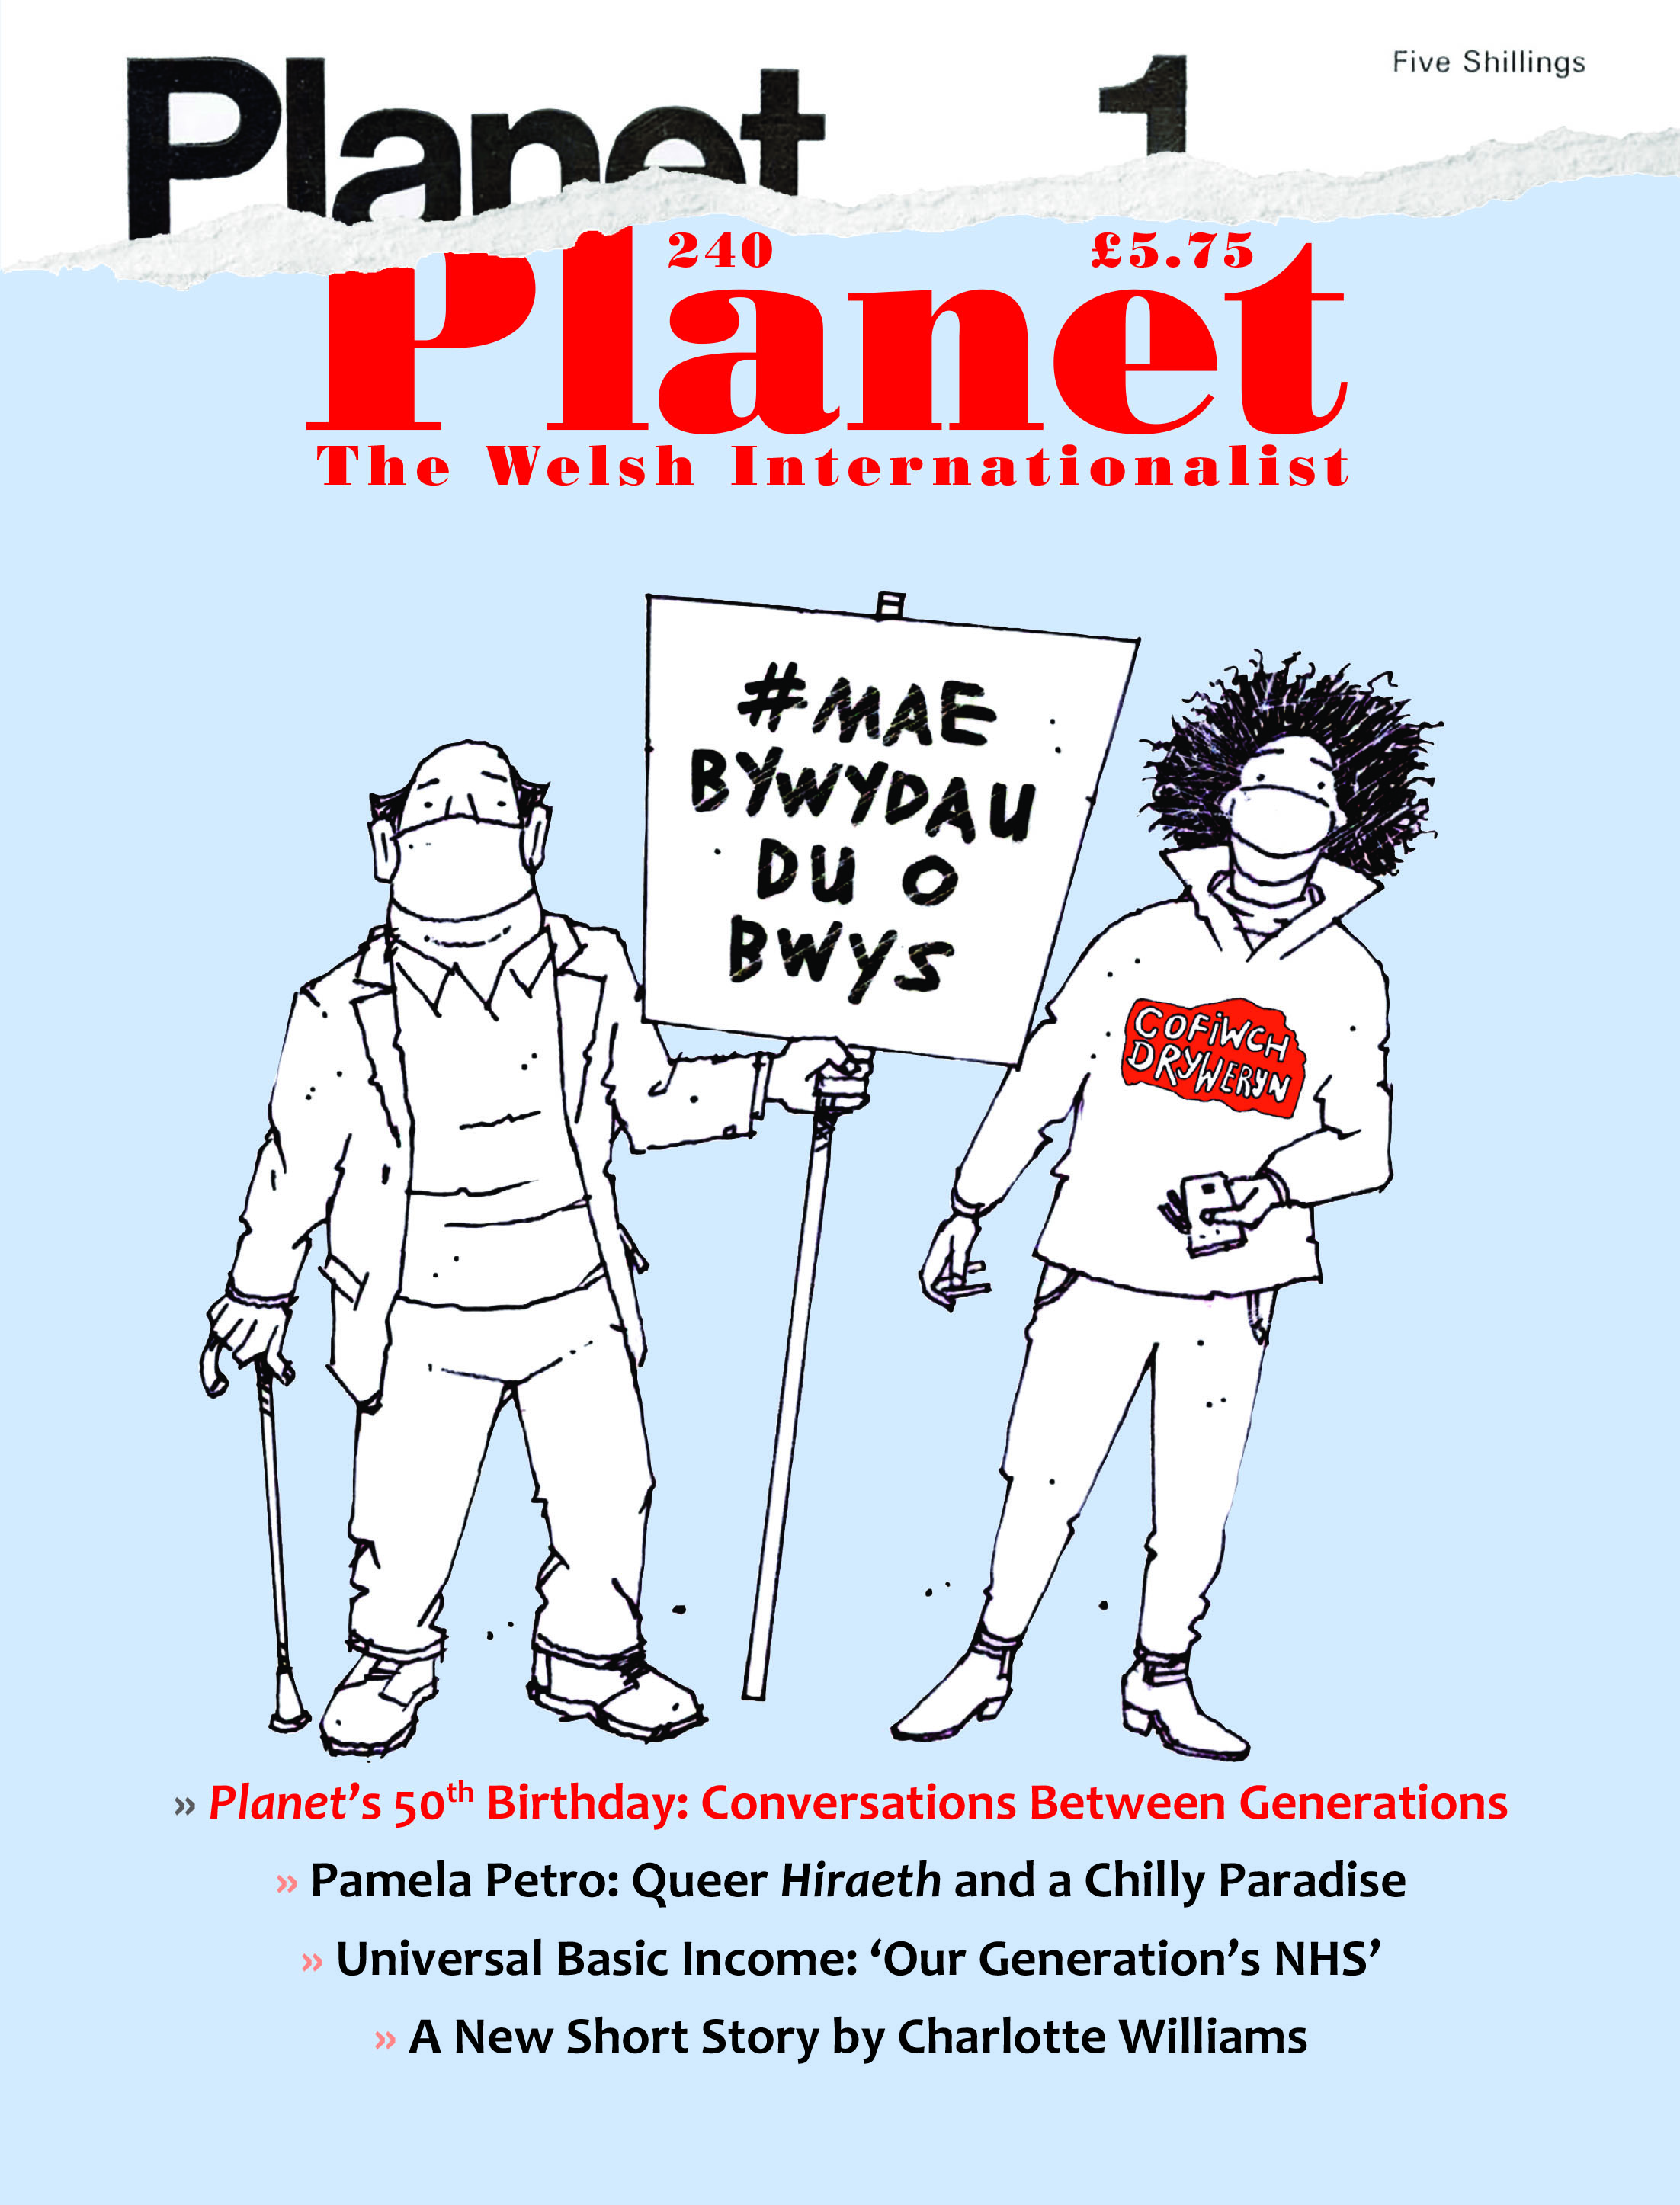 Cover of Planet Edition 240